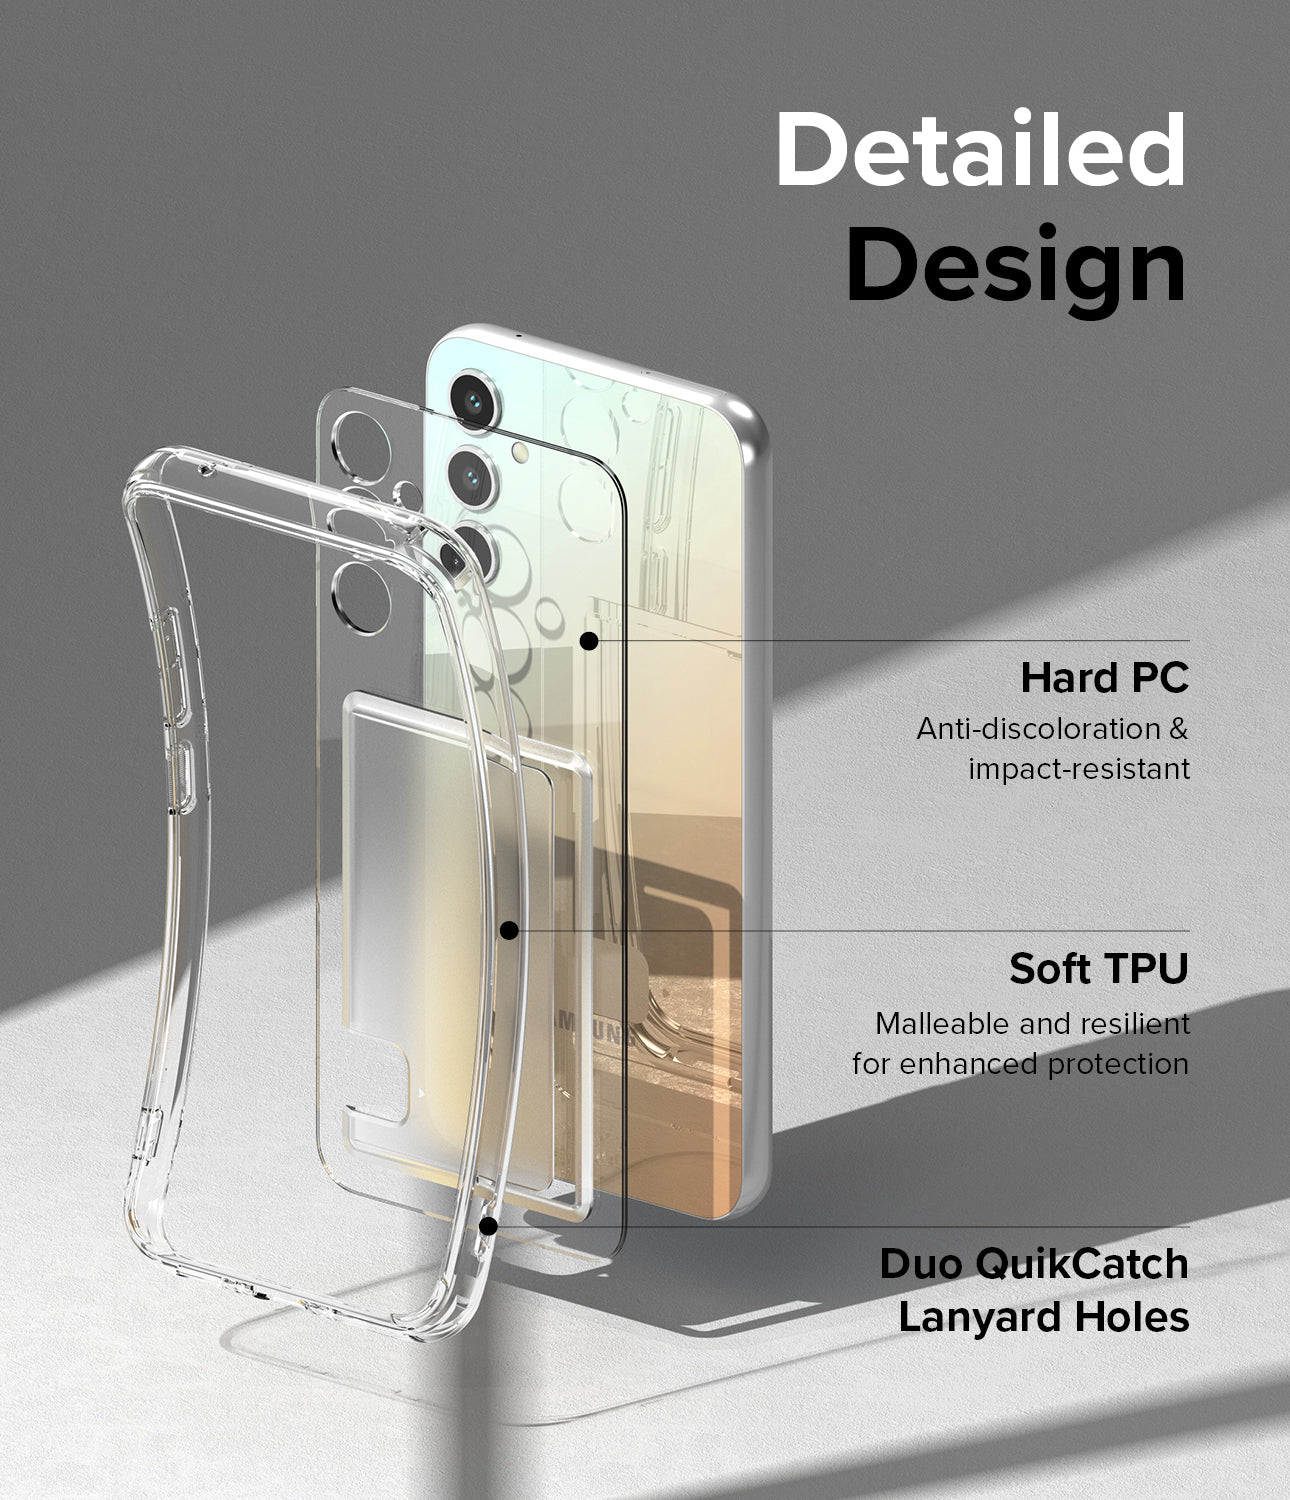 Hard PC for back, Soft TPU for Side and has Duo QuikCatch Lanyard Holes